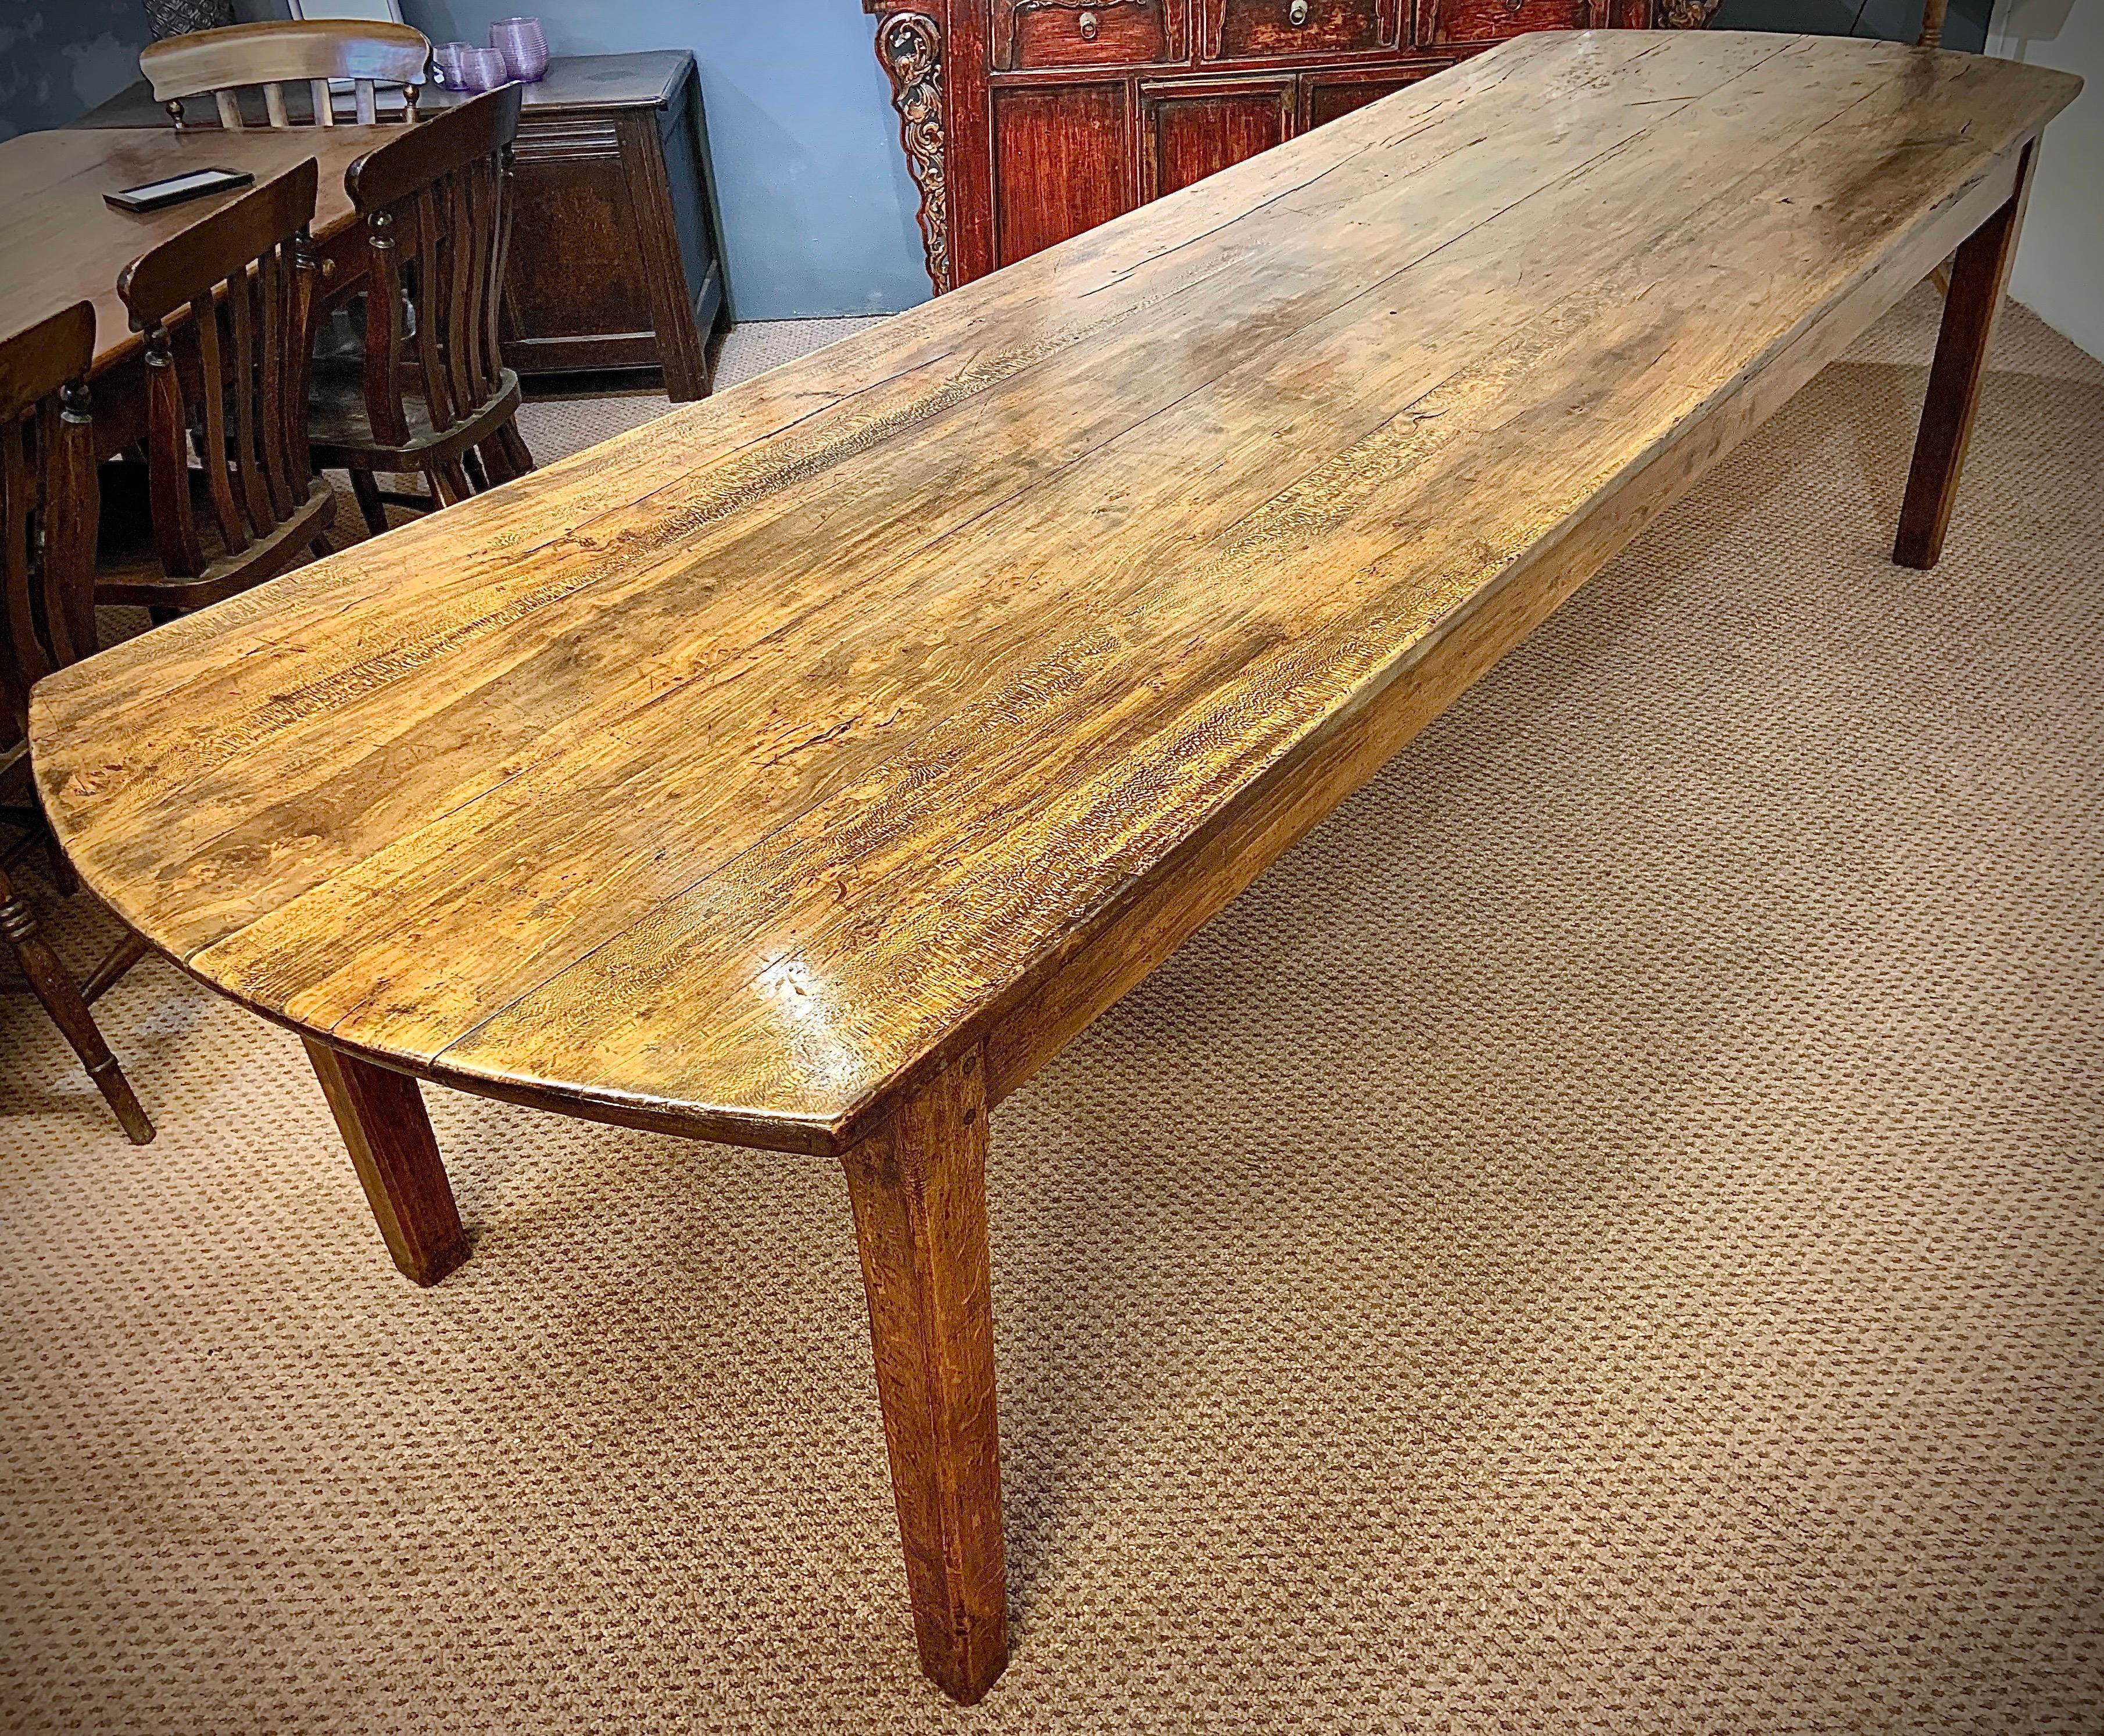 19th century large farmhouse table with oval ends which make the ends more comfortable seating. The London Plain table top sits on a very sturdy oak base. Beautiful mixture of colours in the top of the table.

Measurements :
H 29in (73.7cm)
W